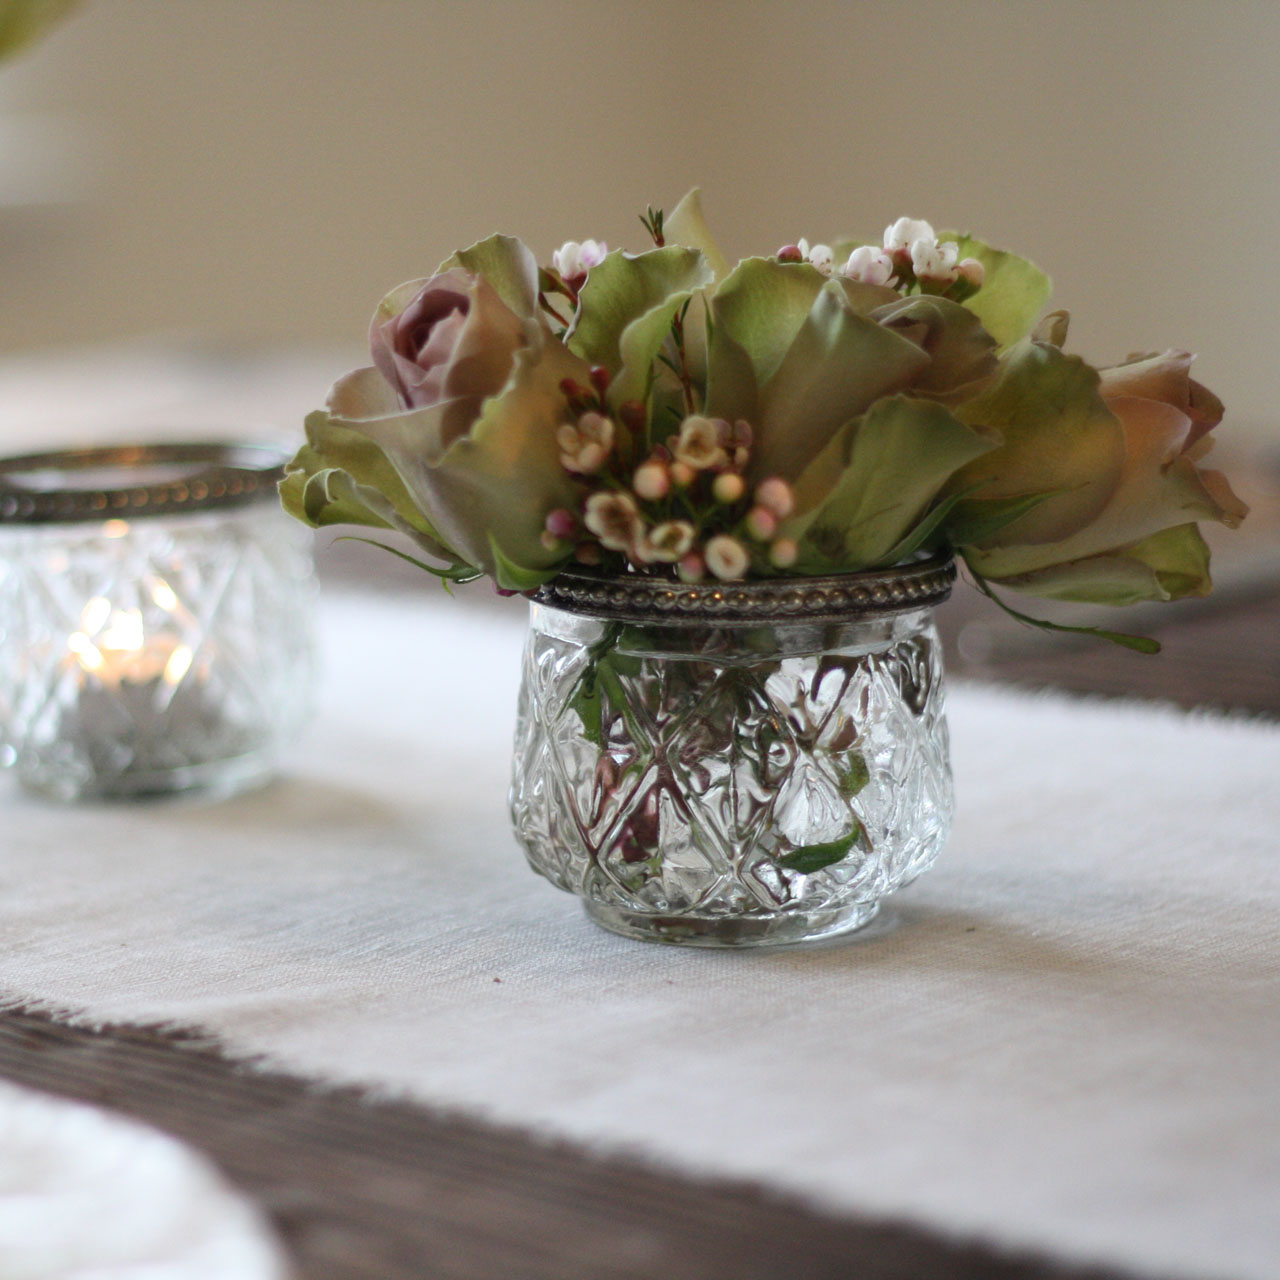 An elegant pressed glass bud vase or candle holder - available from @theweddingomd